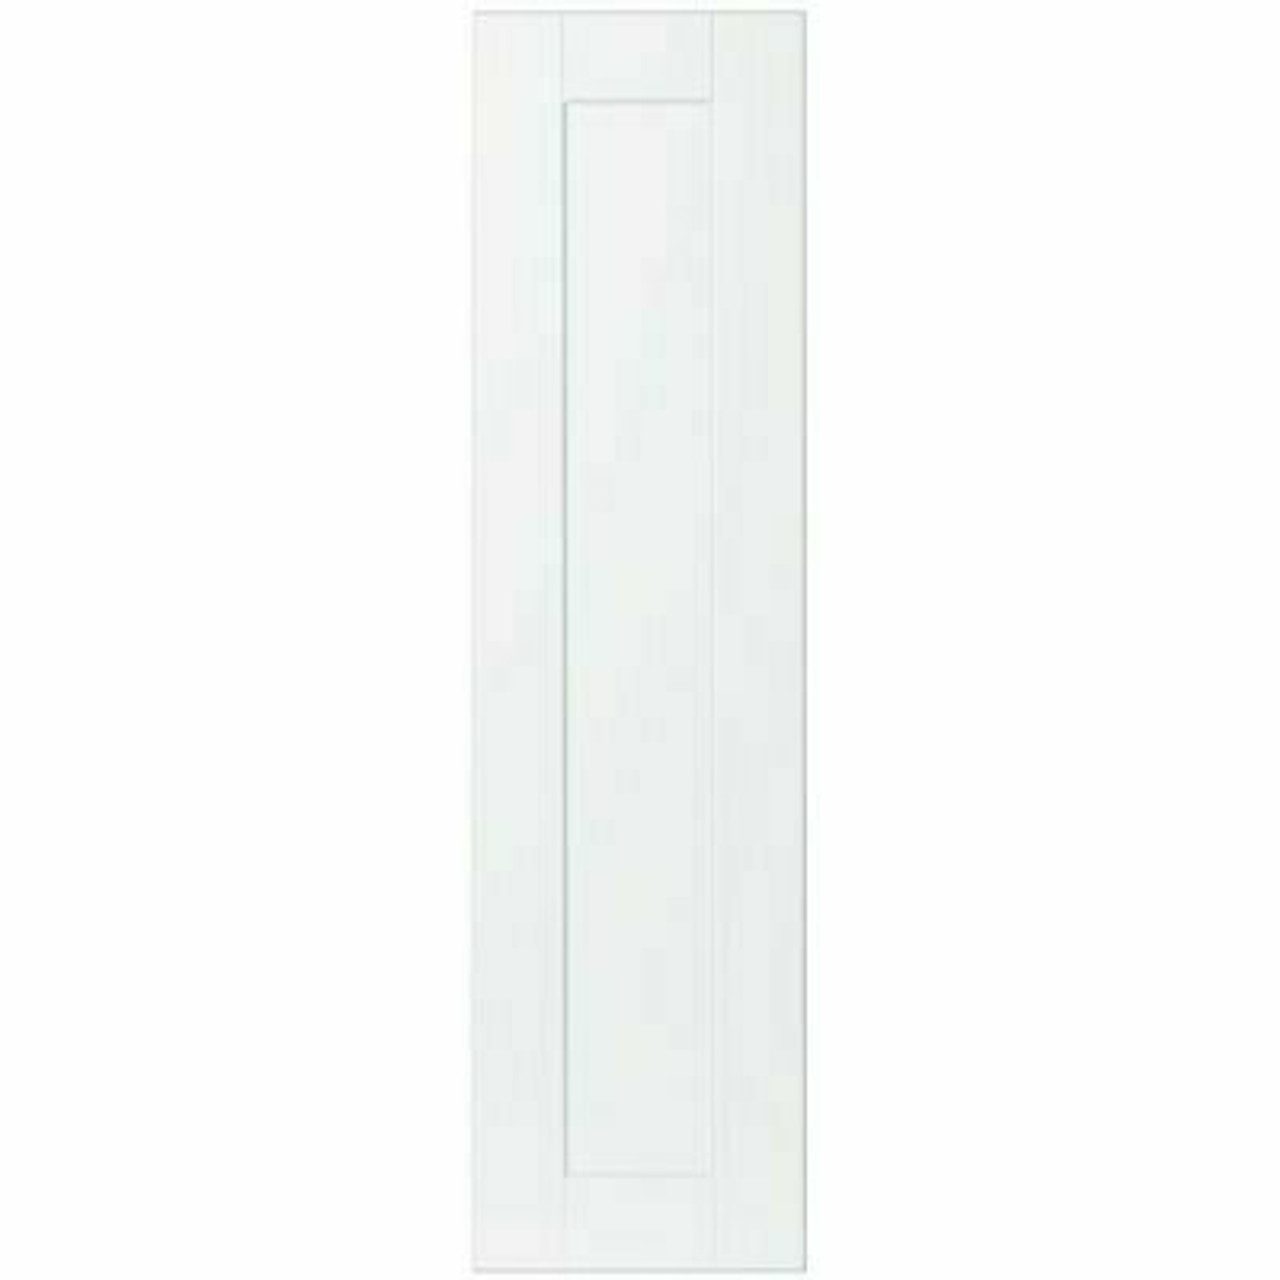 Hampton Bay Satin White 0.65 in. X 41.25 in. X 10.94 in. Shaker Wall Cabinet Decorative End Panel